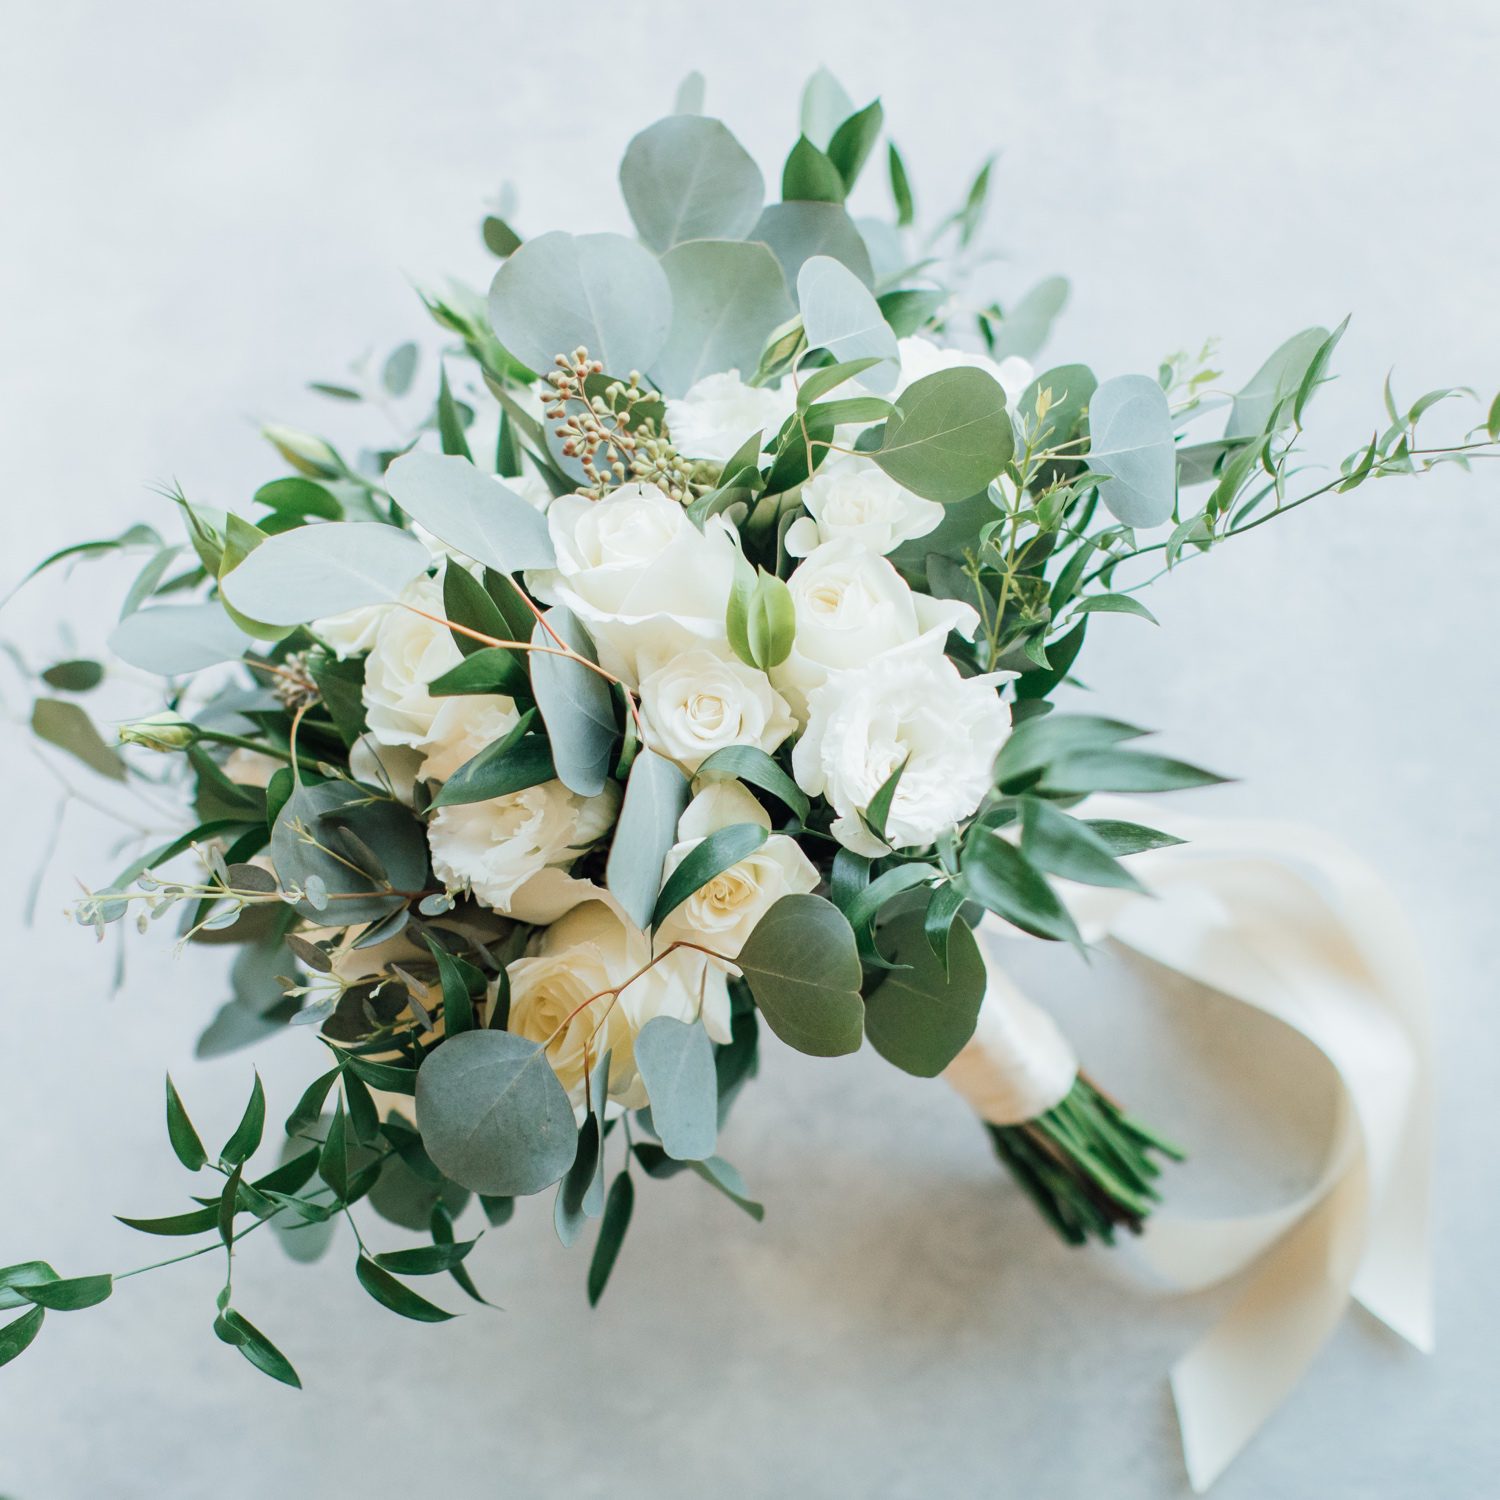 Wedding bouquet created with white roses and green foliage.